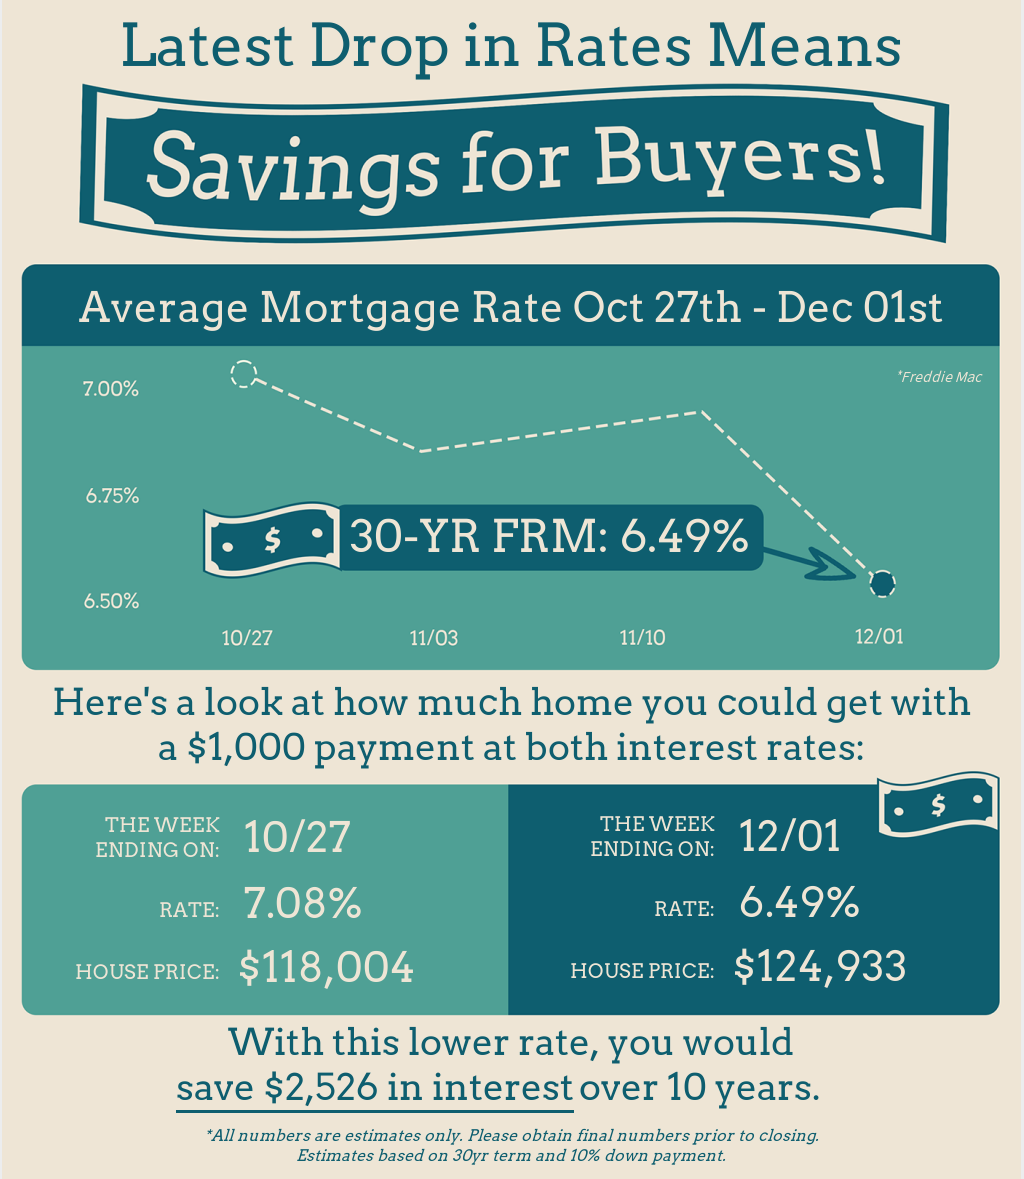 Rates are dropping and home buyers are saving!